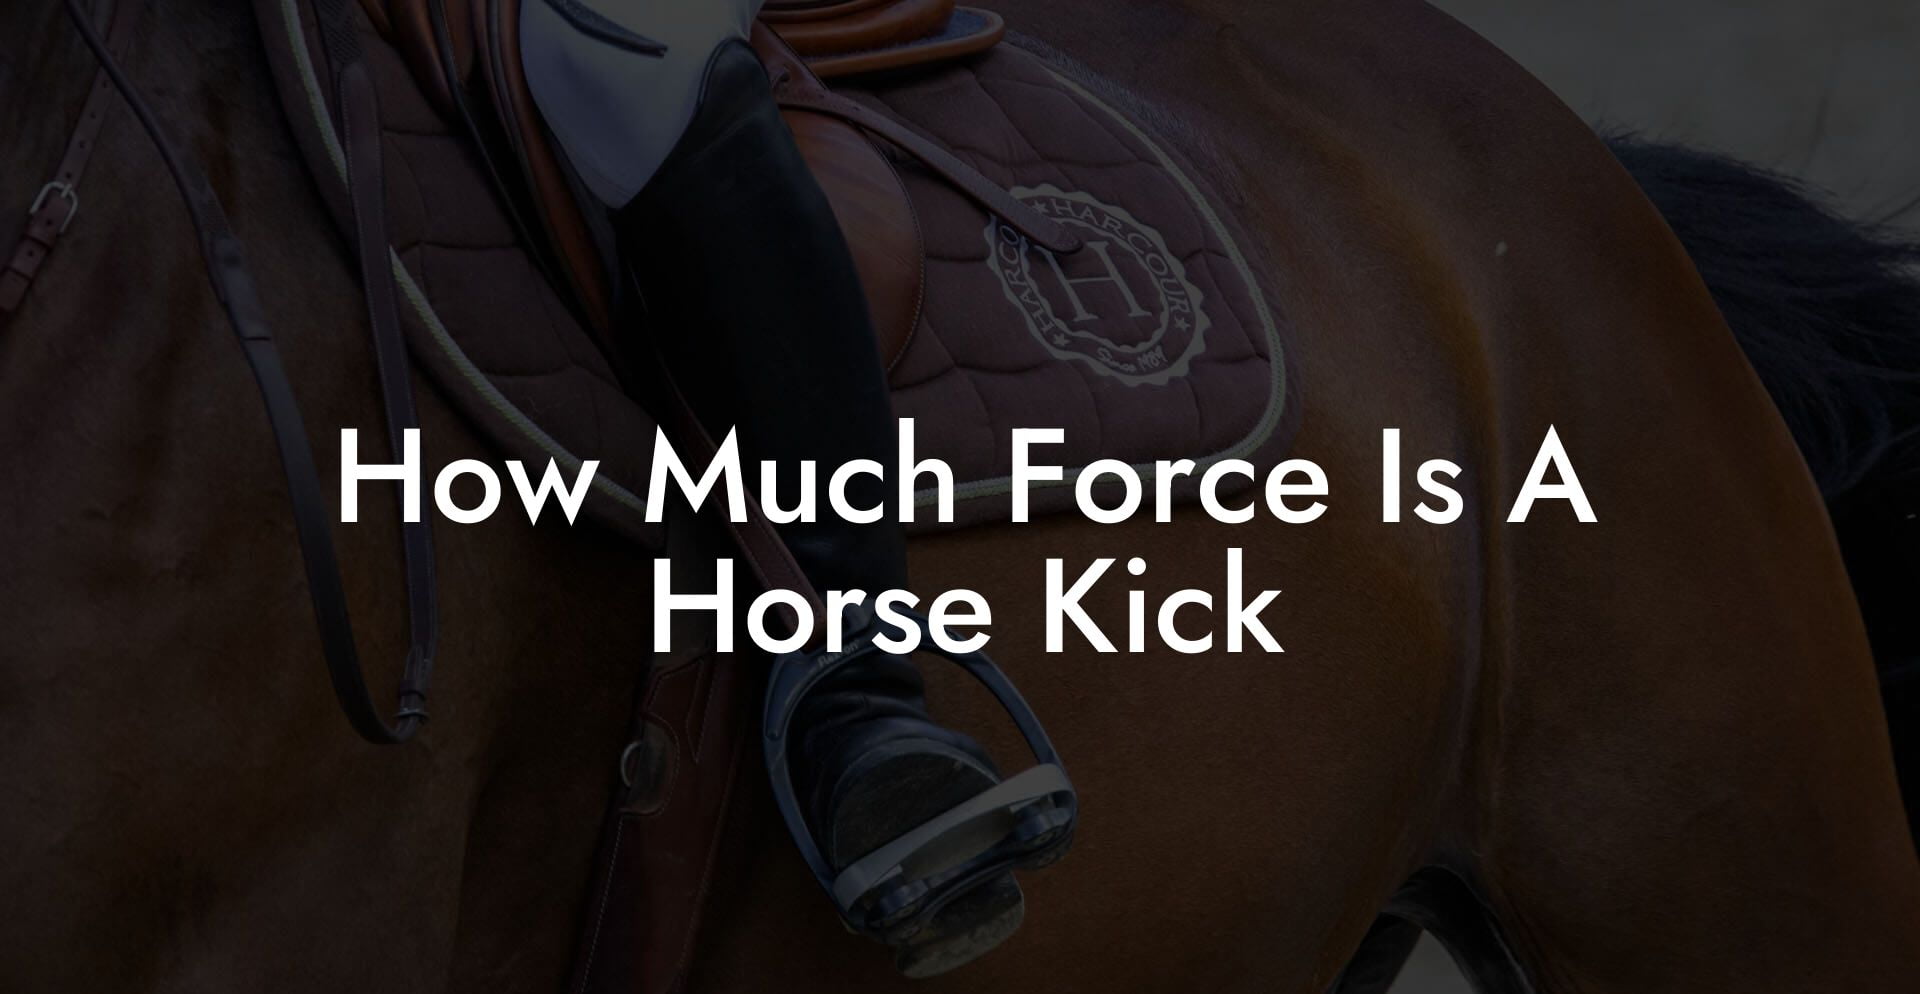 How Much Force Is A Horse Kick